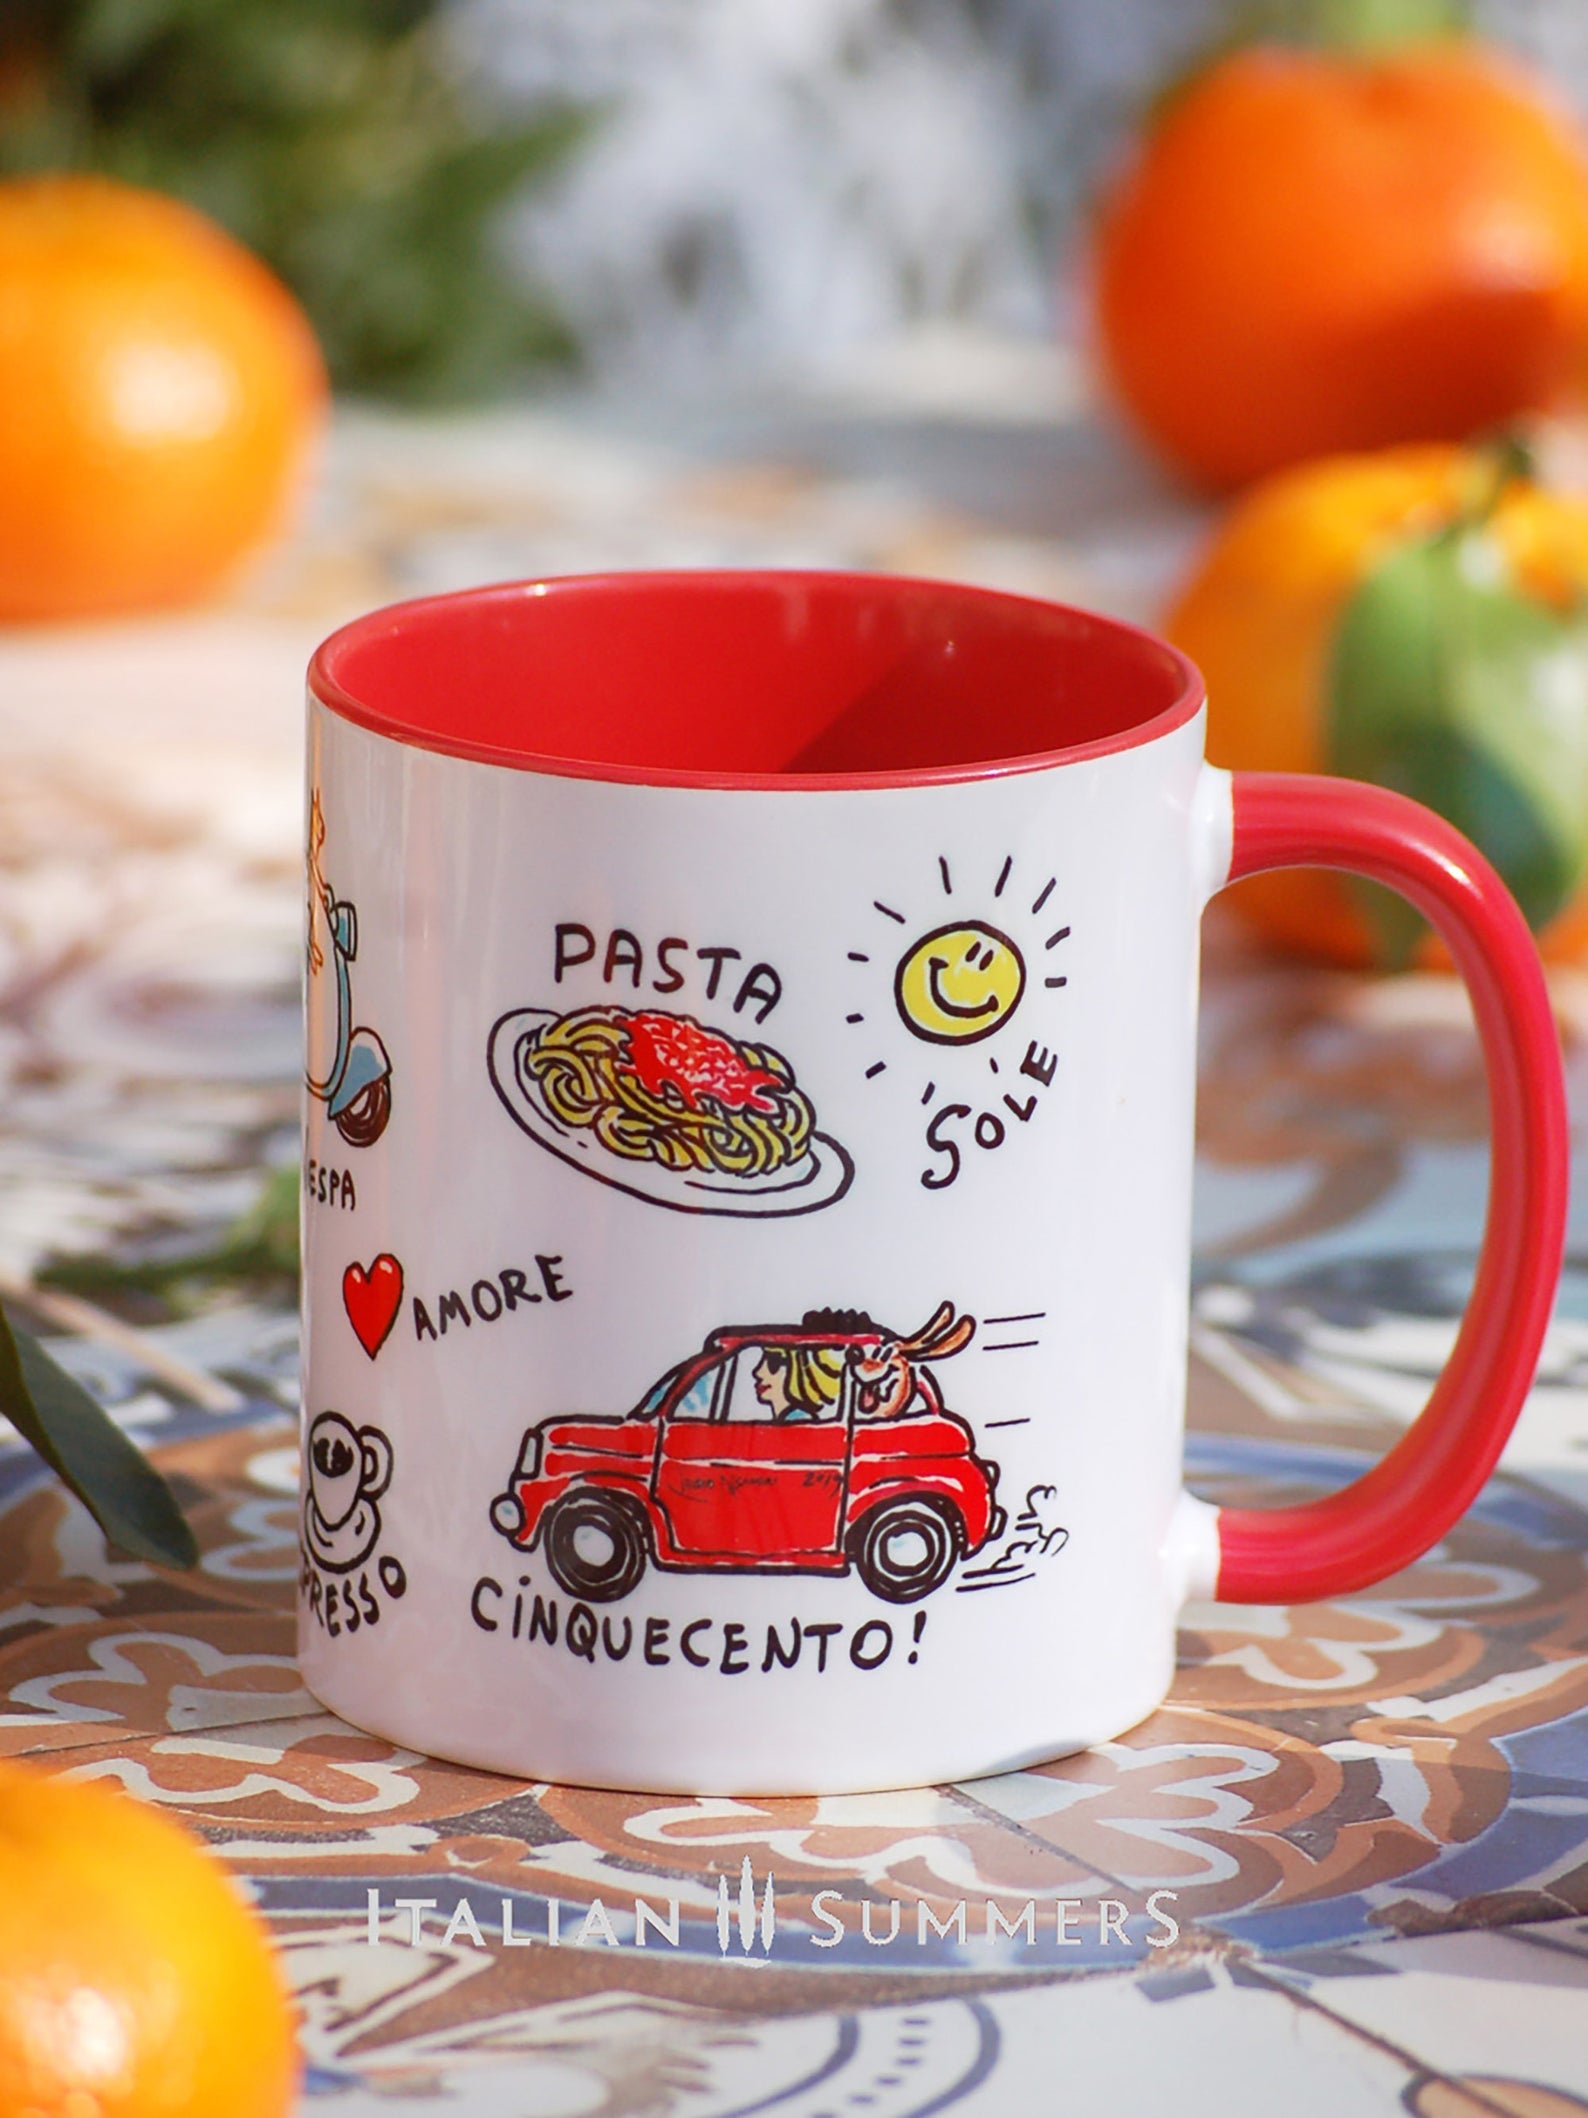 This high-quality mug will have you feeling like you've been transported to the beautiful Italian countryside with its selection of sketches depicting Italy's iconic vita Italiana - like pasta, Vespa, sole, amore, vintage Fiat 500, gelato, vino, pizza espresso and the quote, 'Just take me to Italy'!